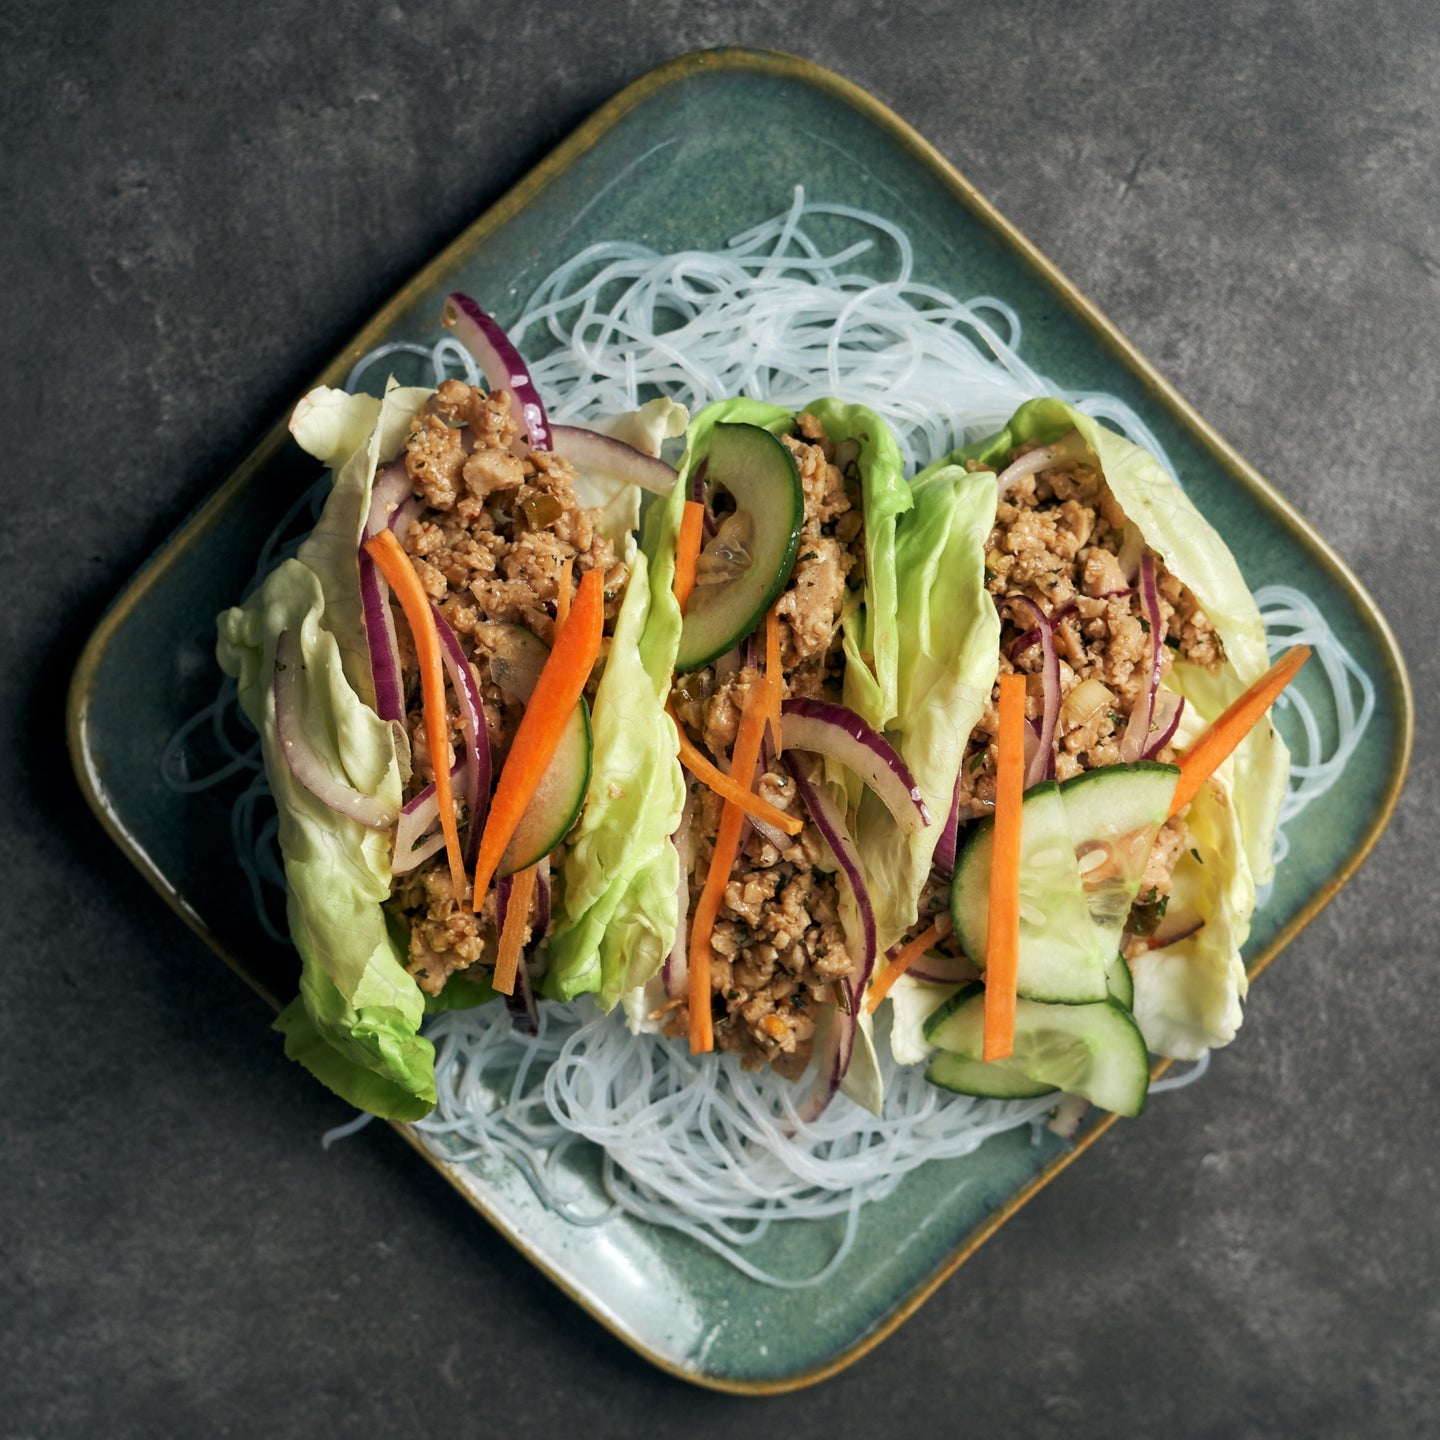 Healthy Chicken Larb Salad with Shredded Carrots, Sliced Cucumber, Larb Dressing & Glass Vermicelli